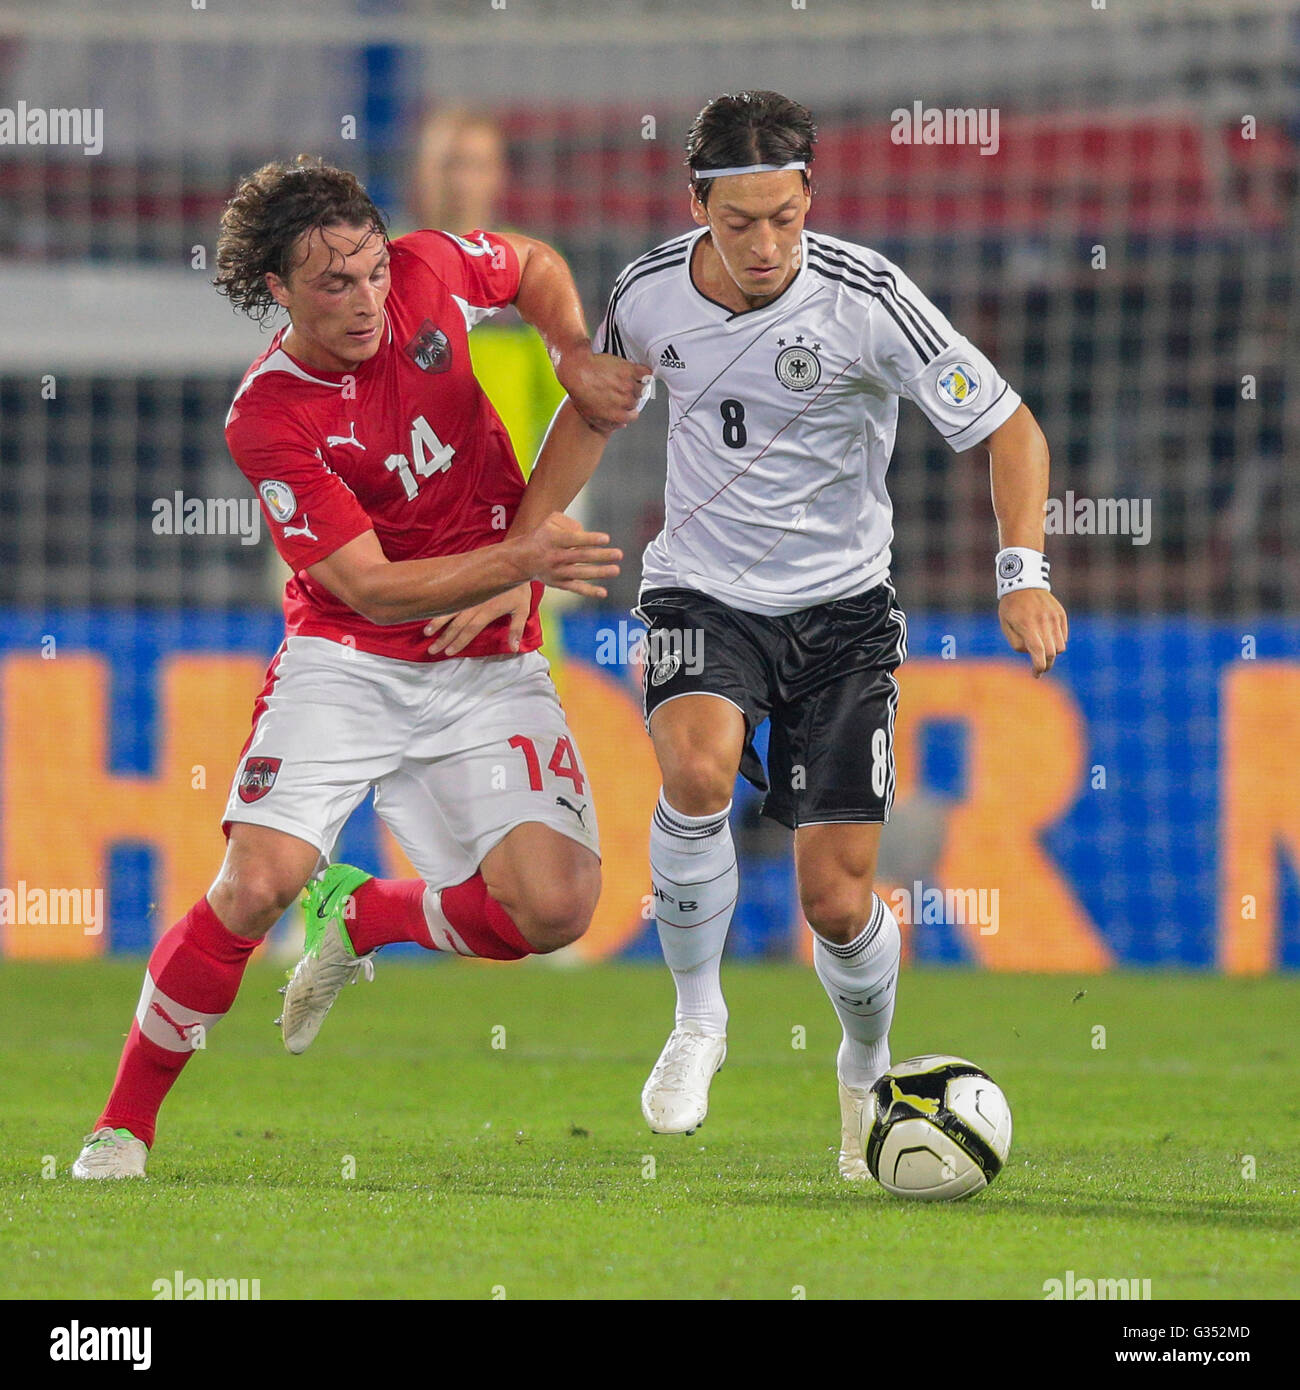 Mesut Oezil, #8 Germany, and Julian Baumgartlinger, 14 Austria, fight for the ball during the WC qualifier soccer game on Stock Photo